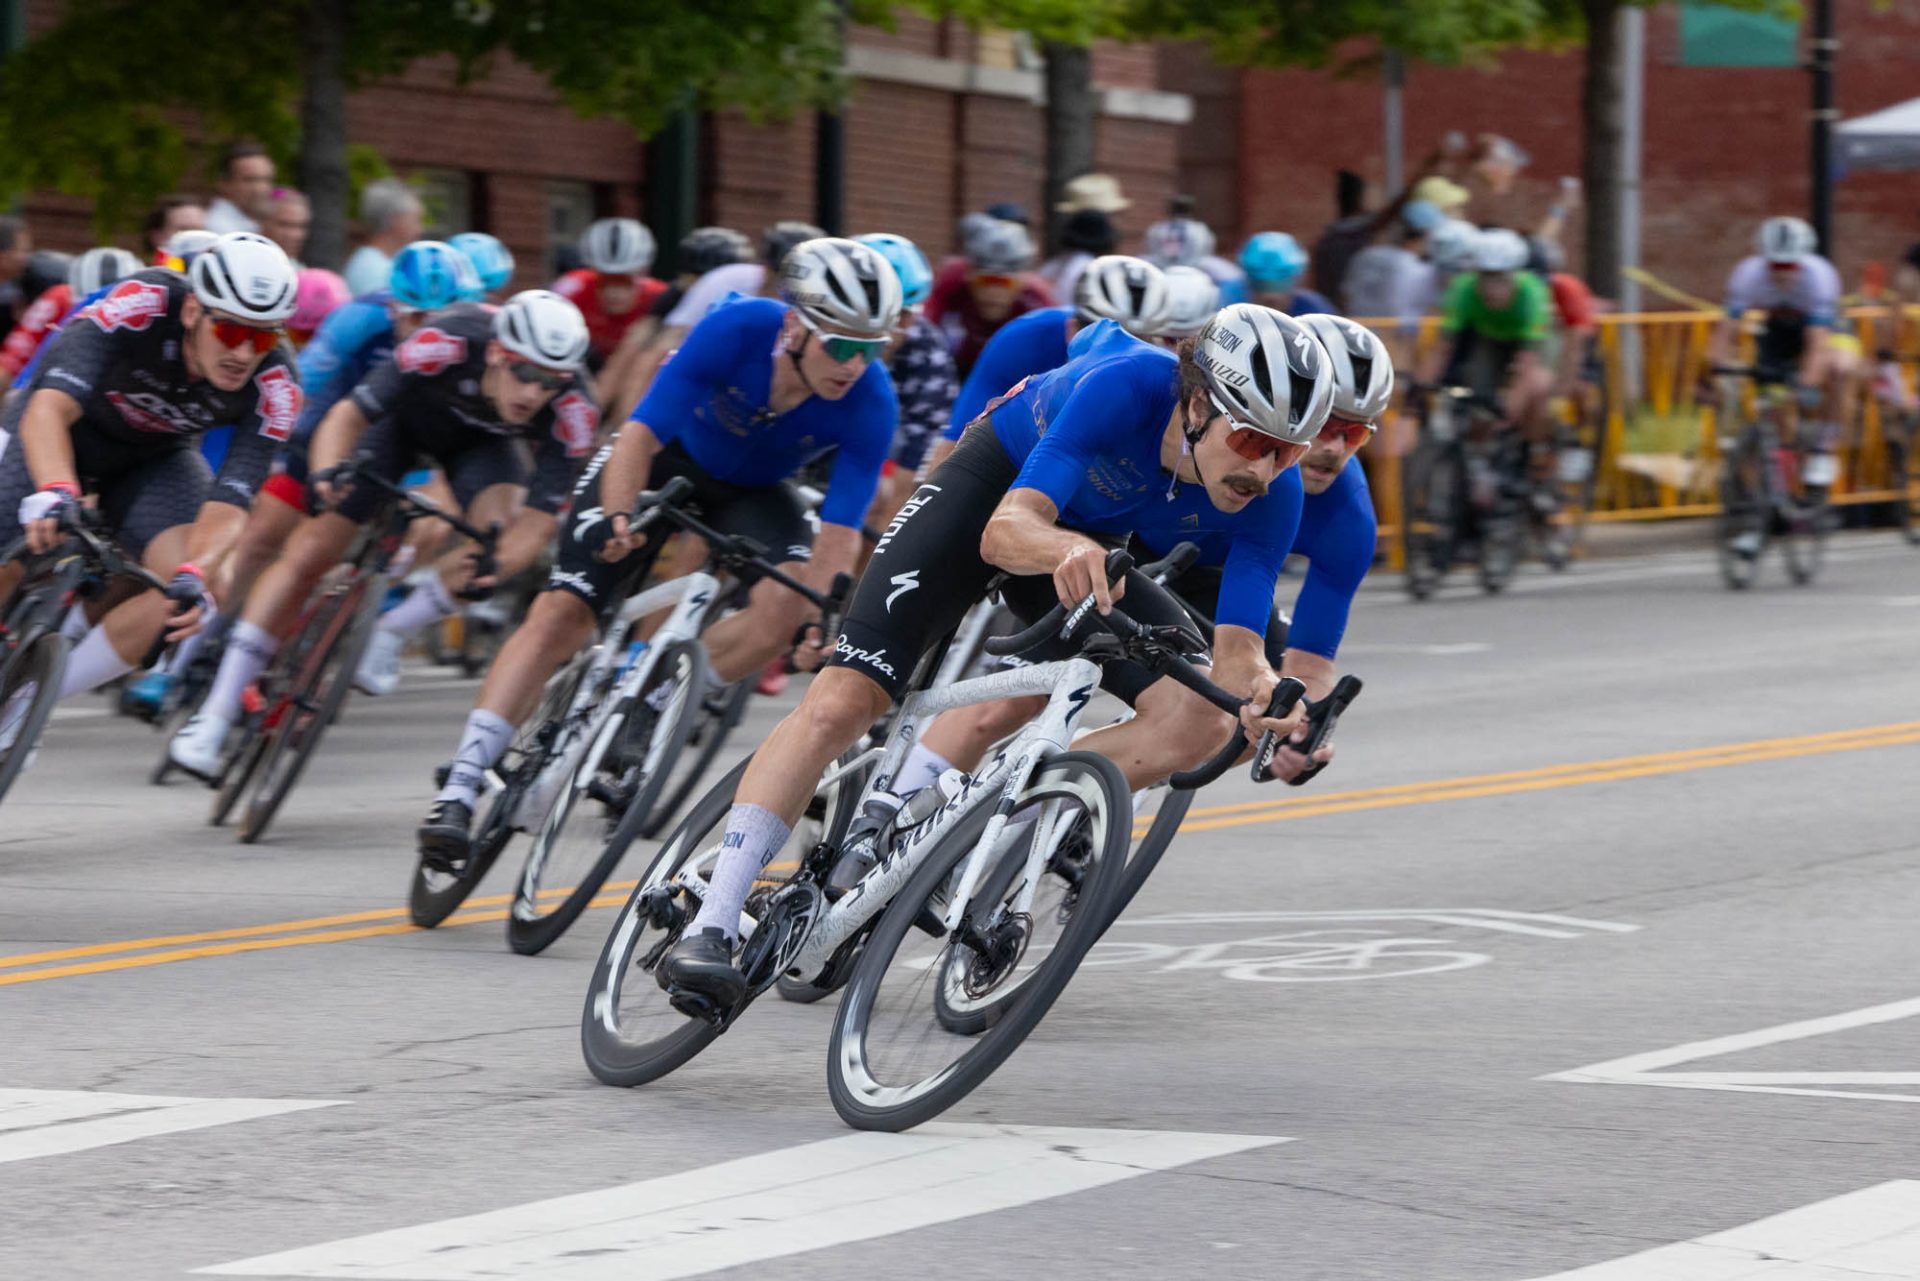 Sam Boardman leads the pack at Tulsa Tough. He's at the front of a line of L39ION riders heading into a corner.